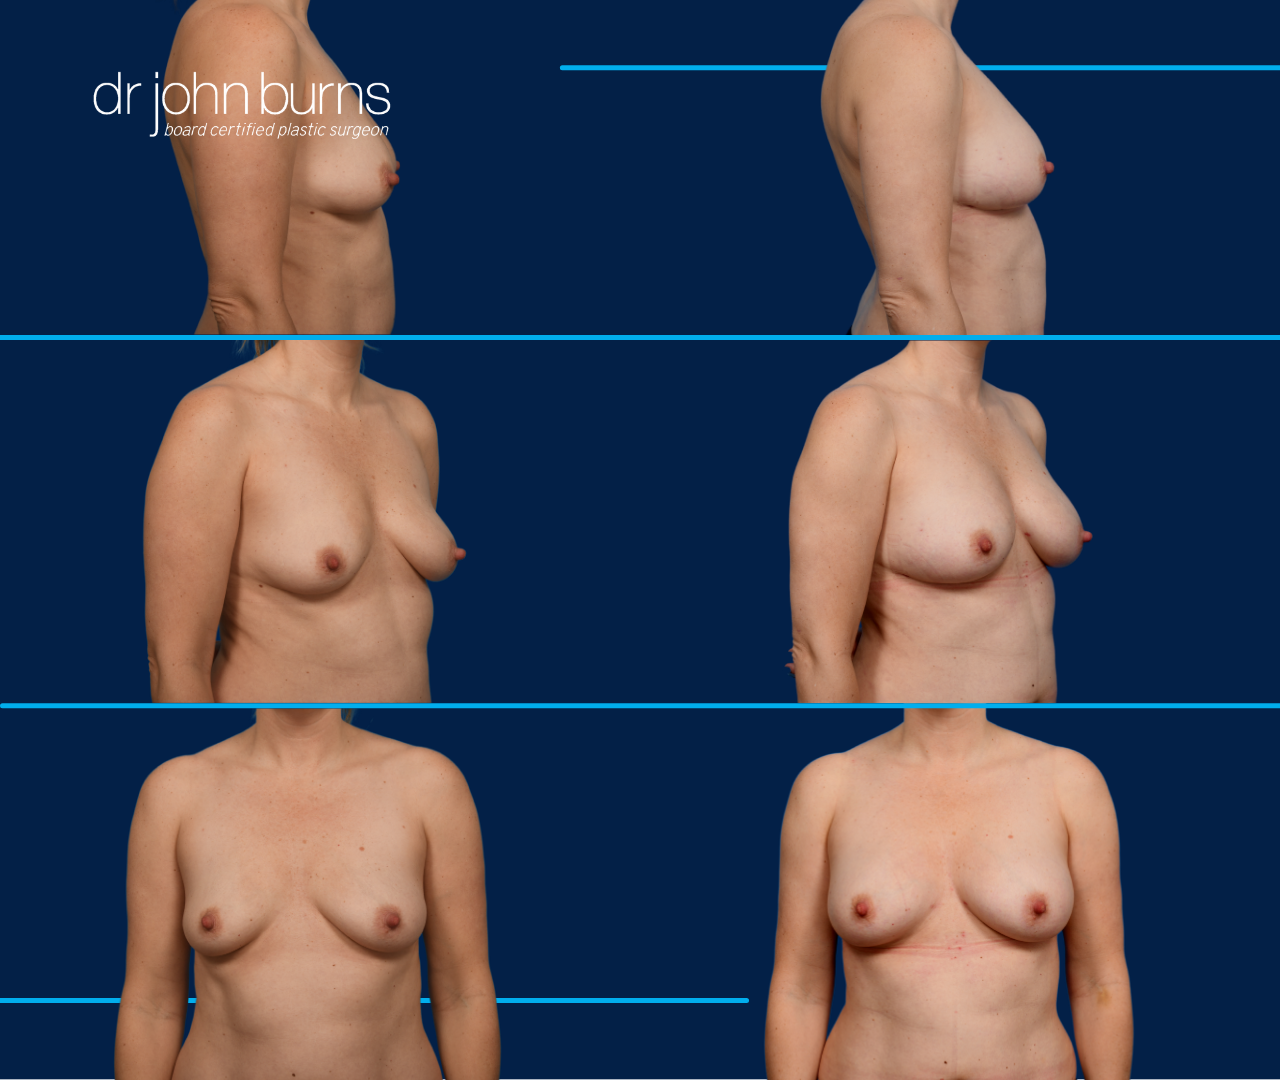 case 15- before and after breast augmentation fat transfer by top plastic surgeon, Dr. John Burns